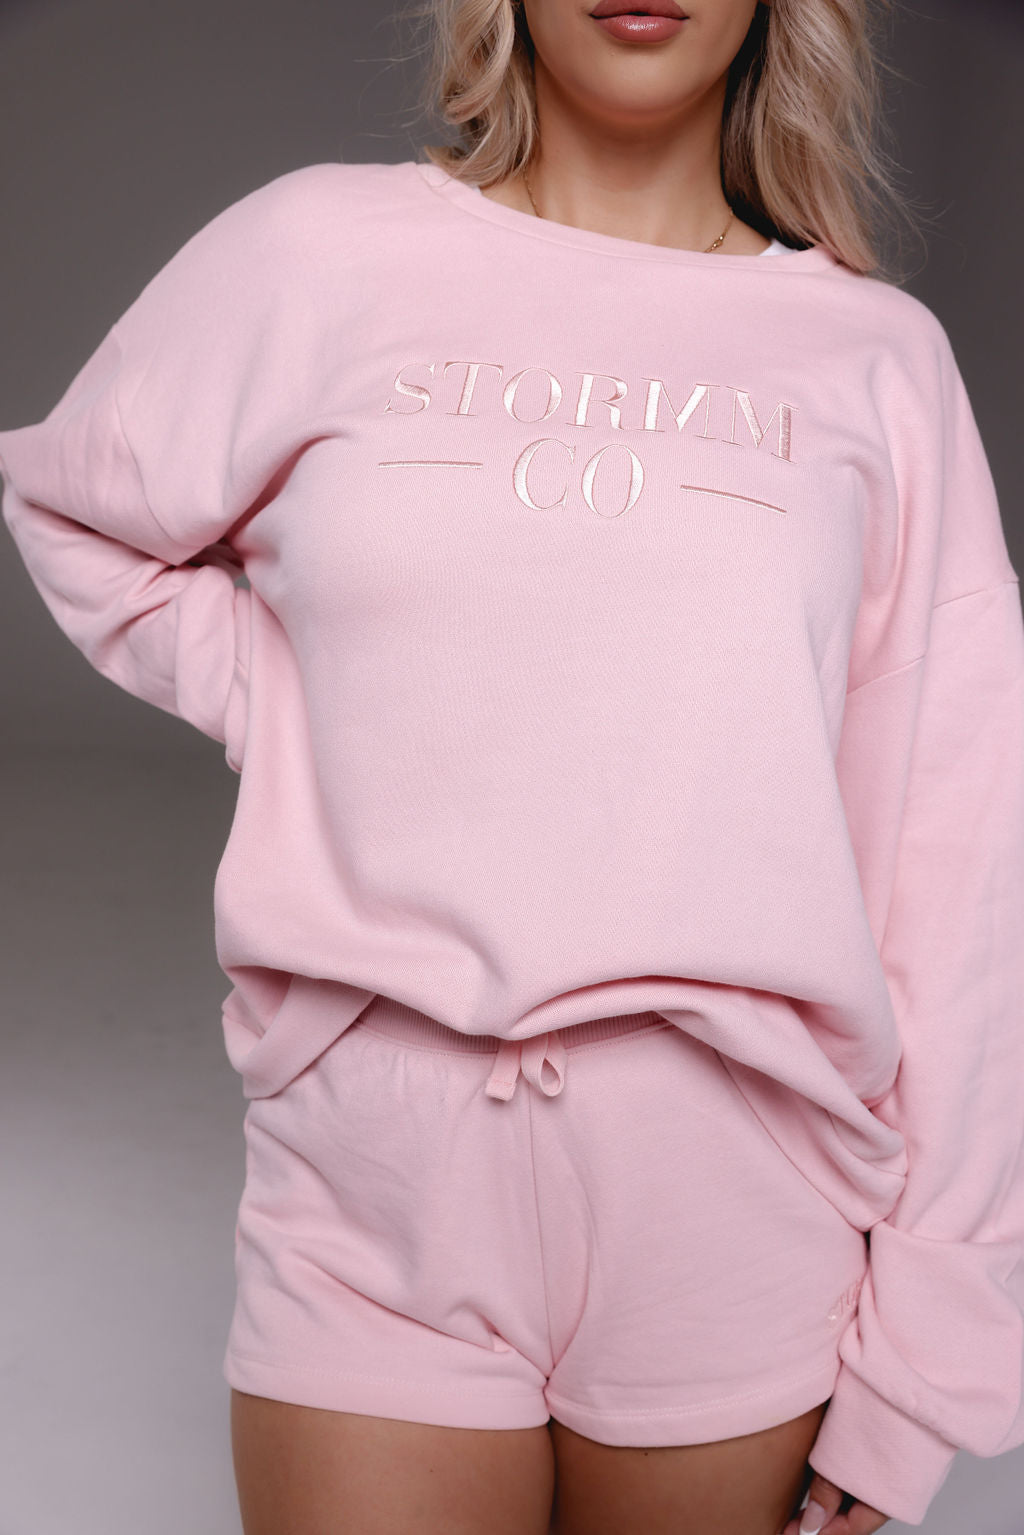 Pink oversized jumper from Stormm Co's Hues of Happiness collection